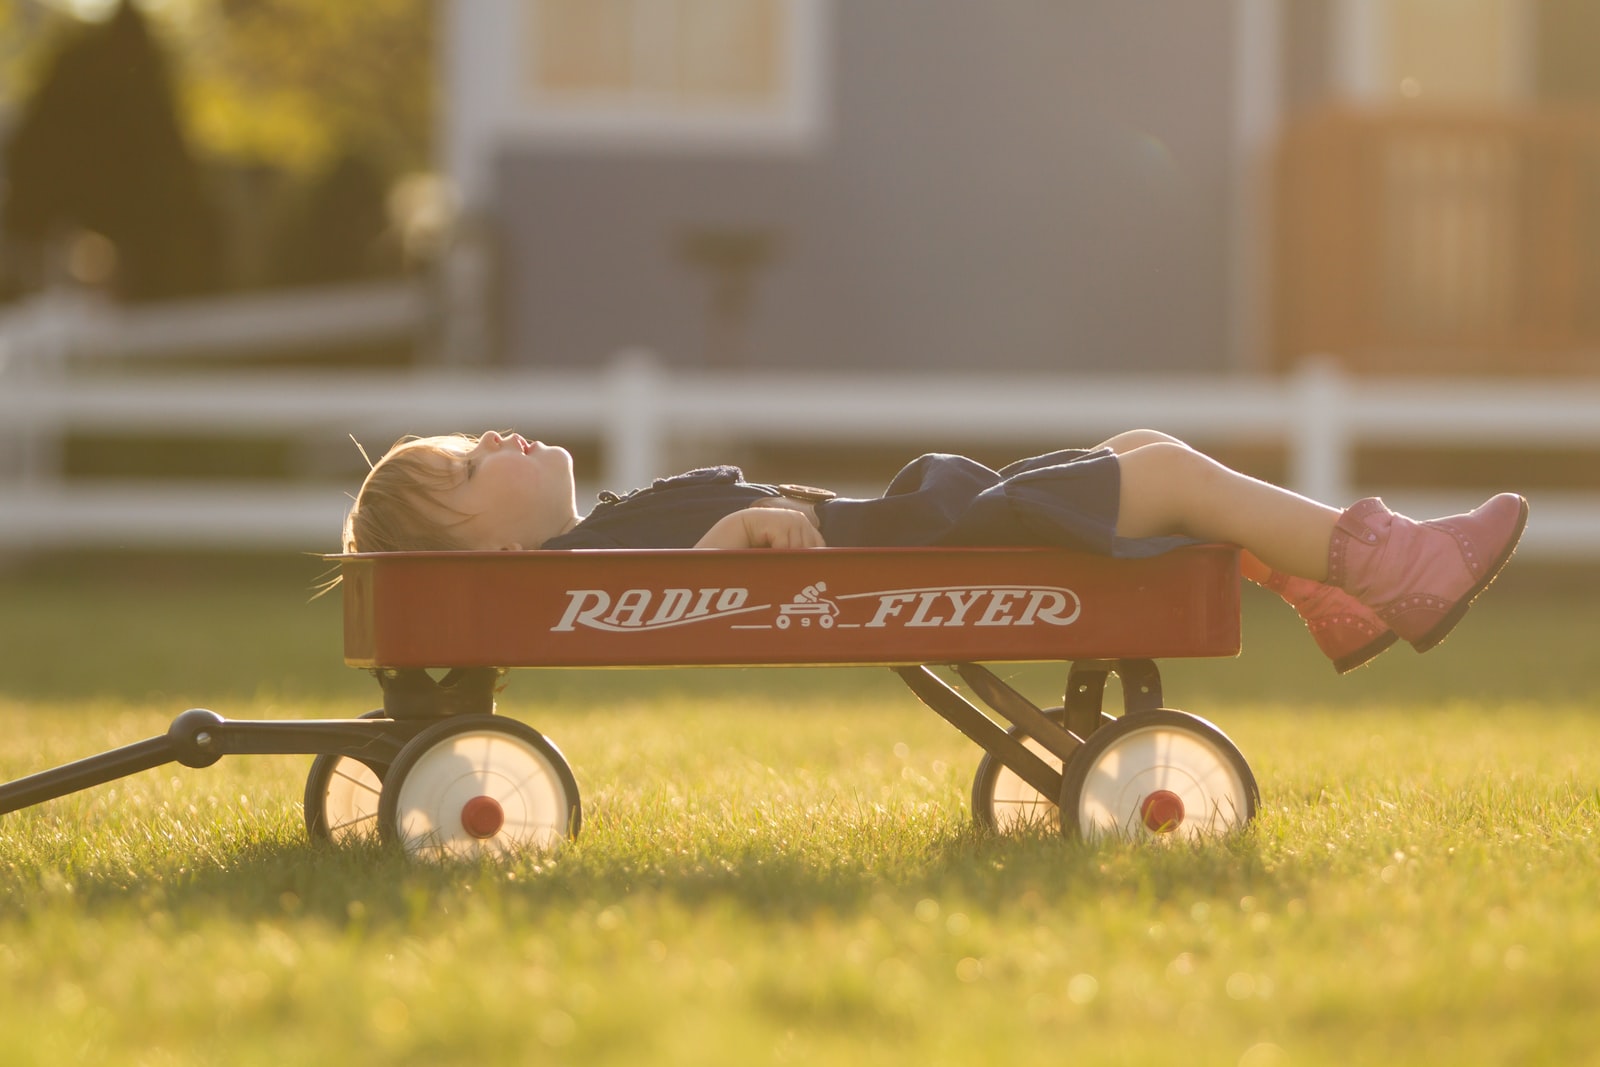 napping boy on red Radio Flyer during daytime